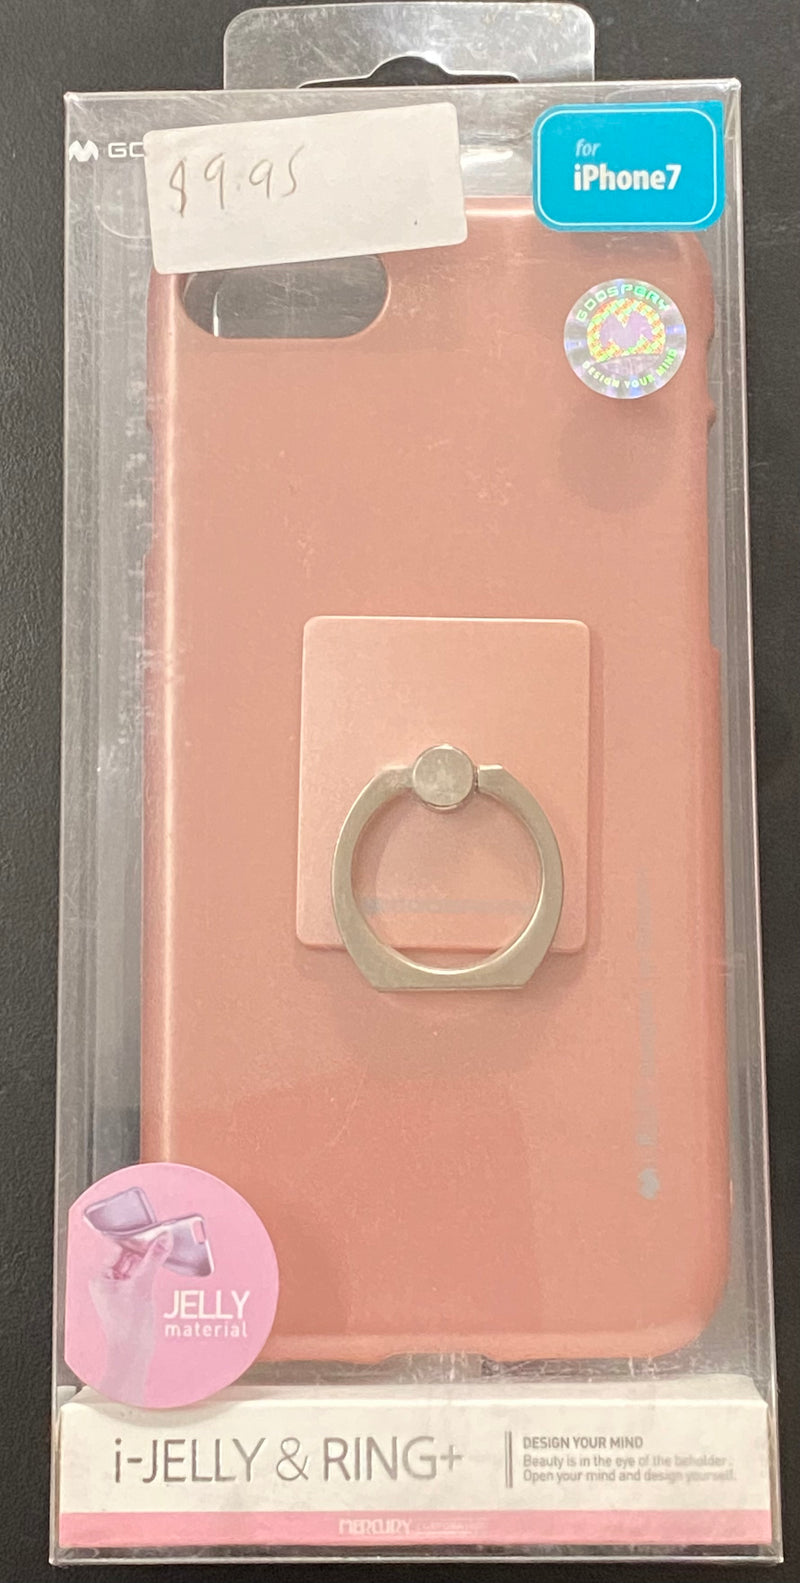 I-Jelly Metalized Case with ring for iPhone 7 - Rose Gold